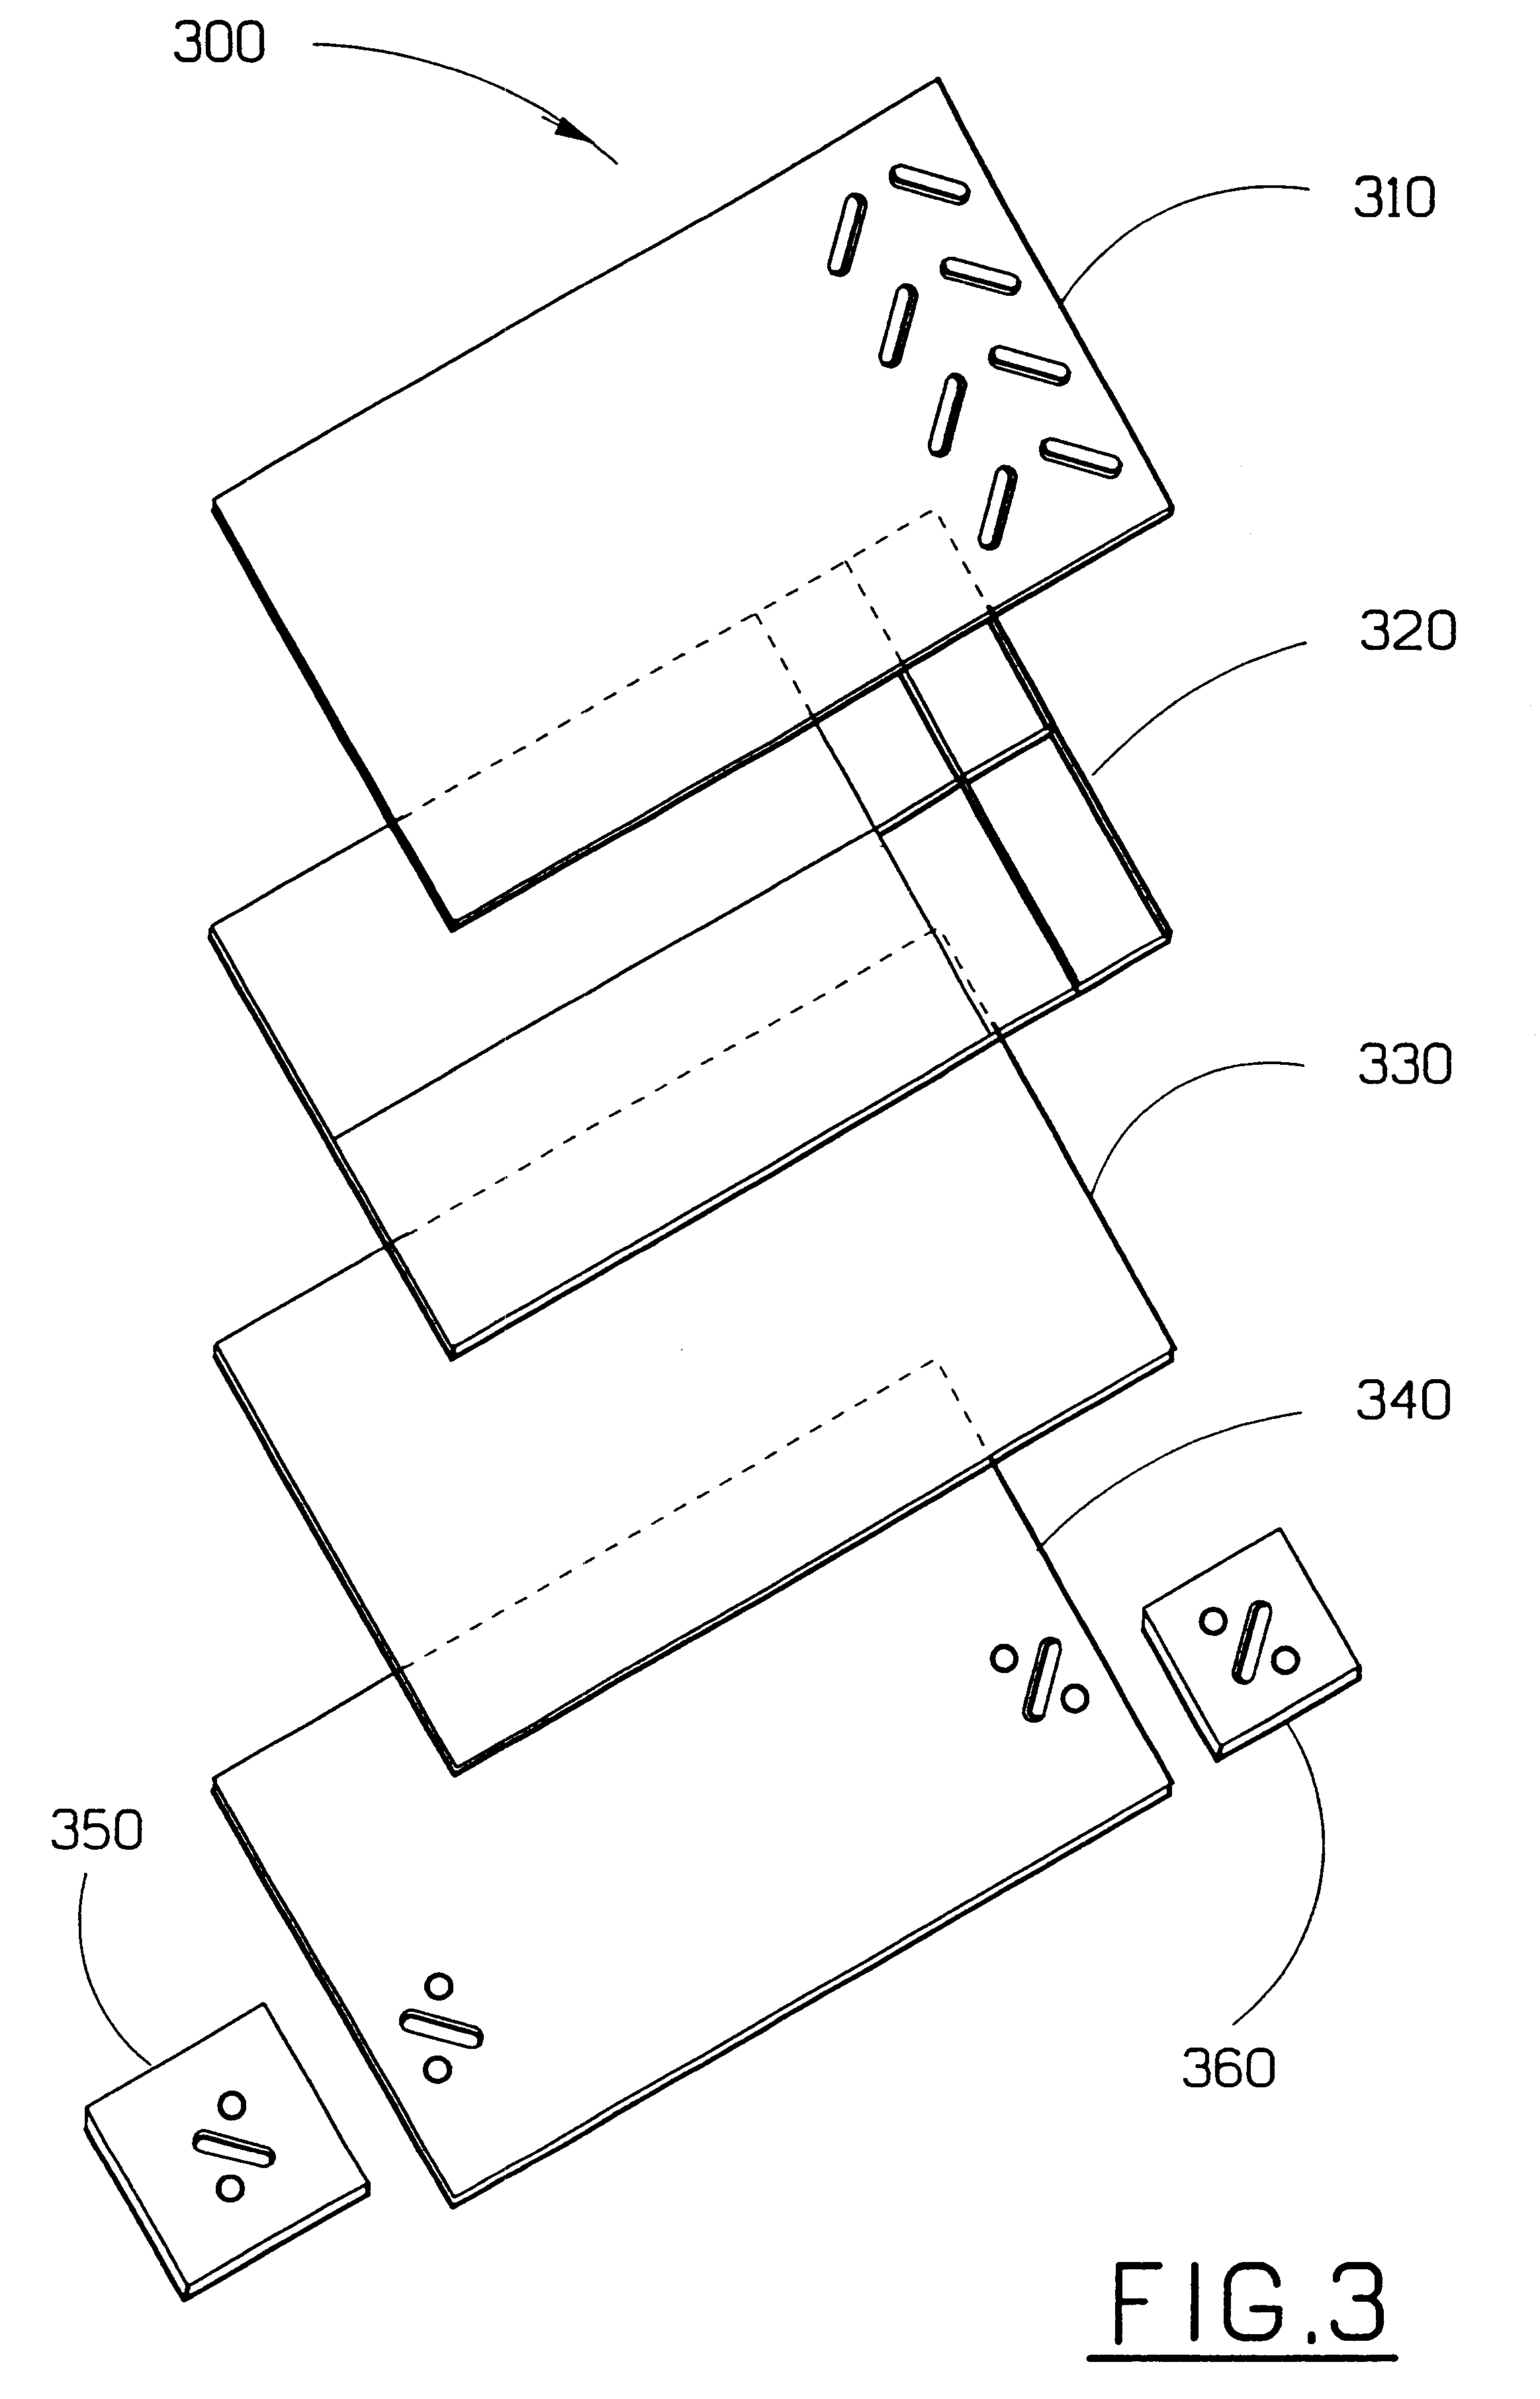 Arrangement for use in an antenna array for transmitting and receiving at at least one frequency in at least two polarizations